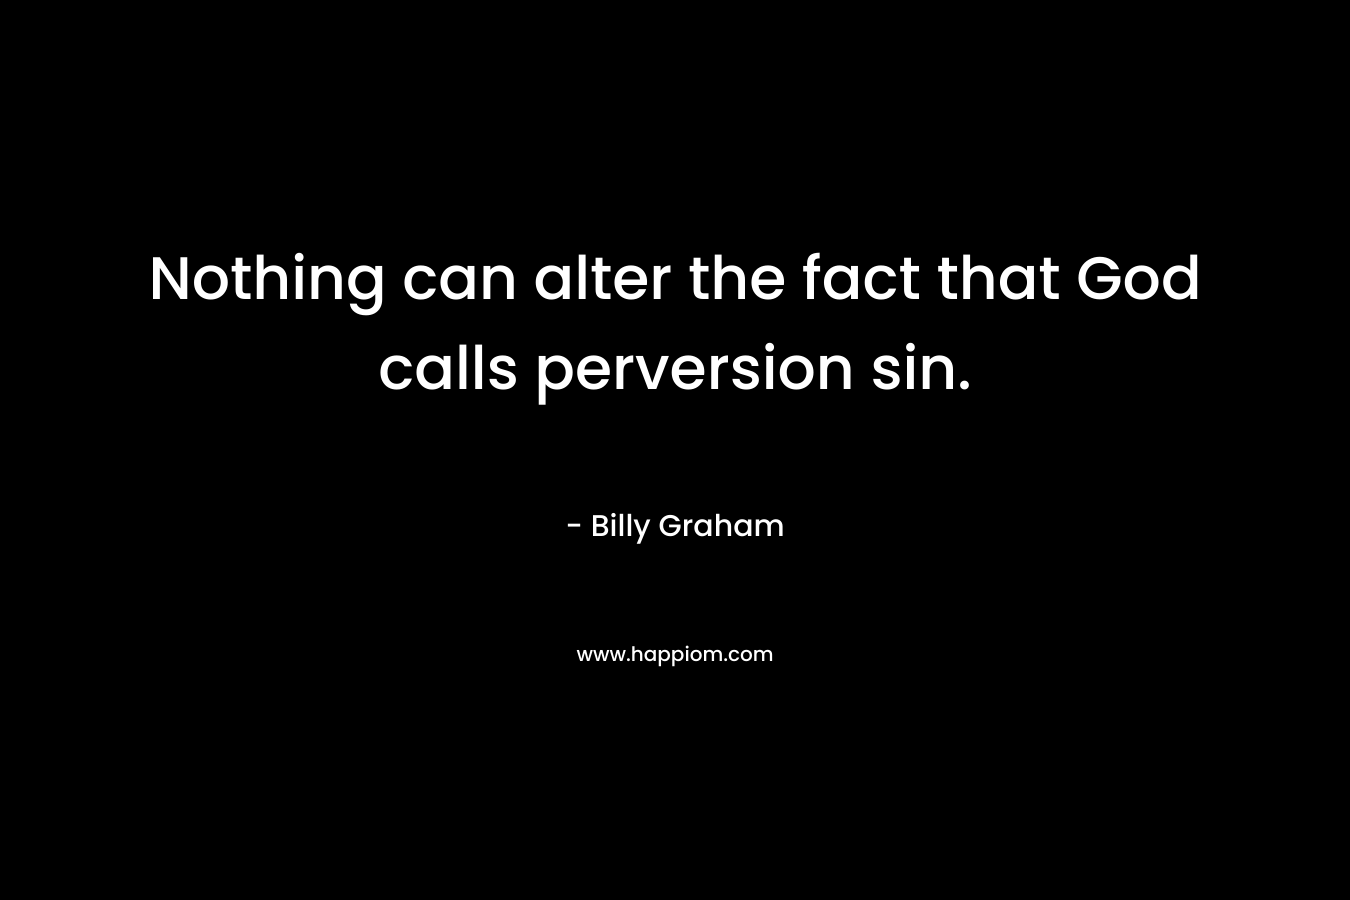 Nothing can alter the fact that God calls perversion sin.